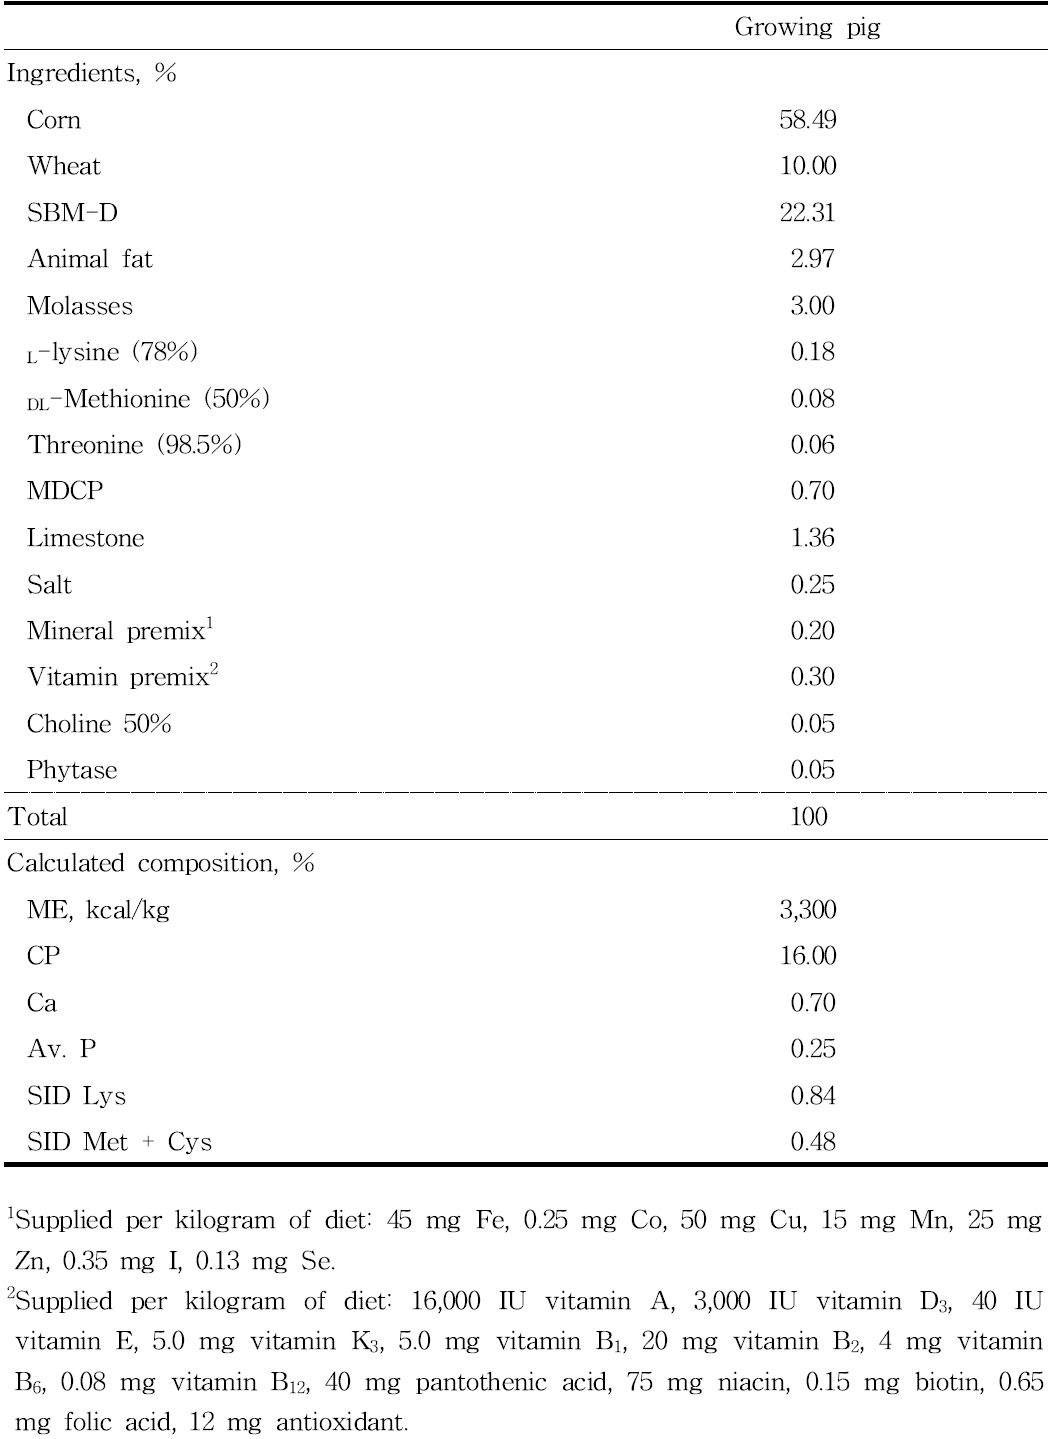 Formula and chemical compositions of experimental diets (as-fed basis)